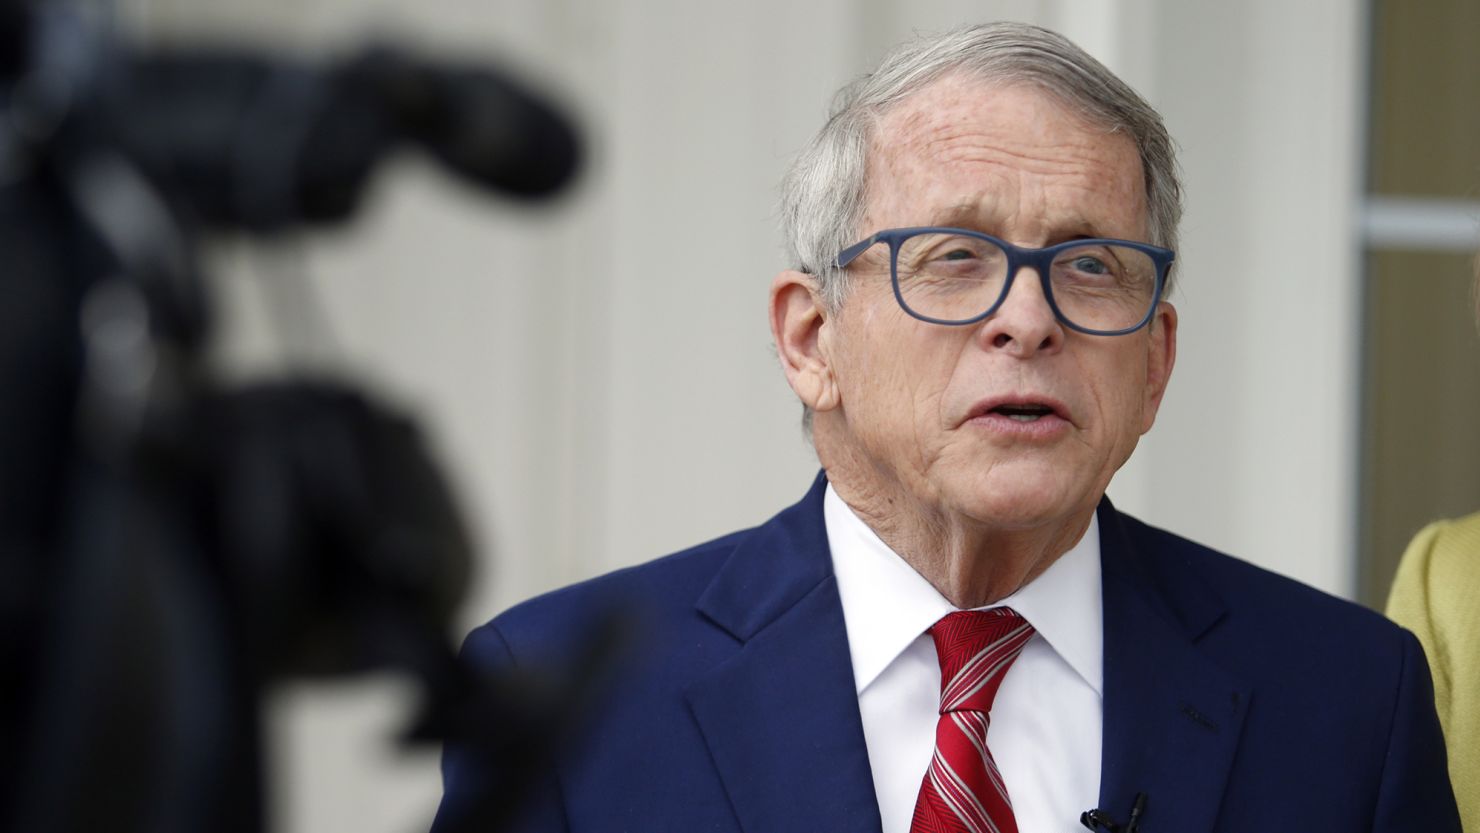 Ohio Gov. Mike DeWine talks with reporters in Cedarville, Ohio, on May 3, 2022.